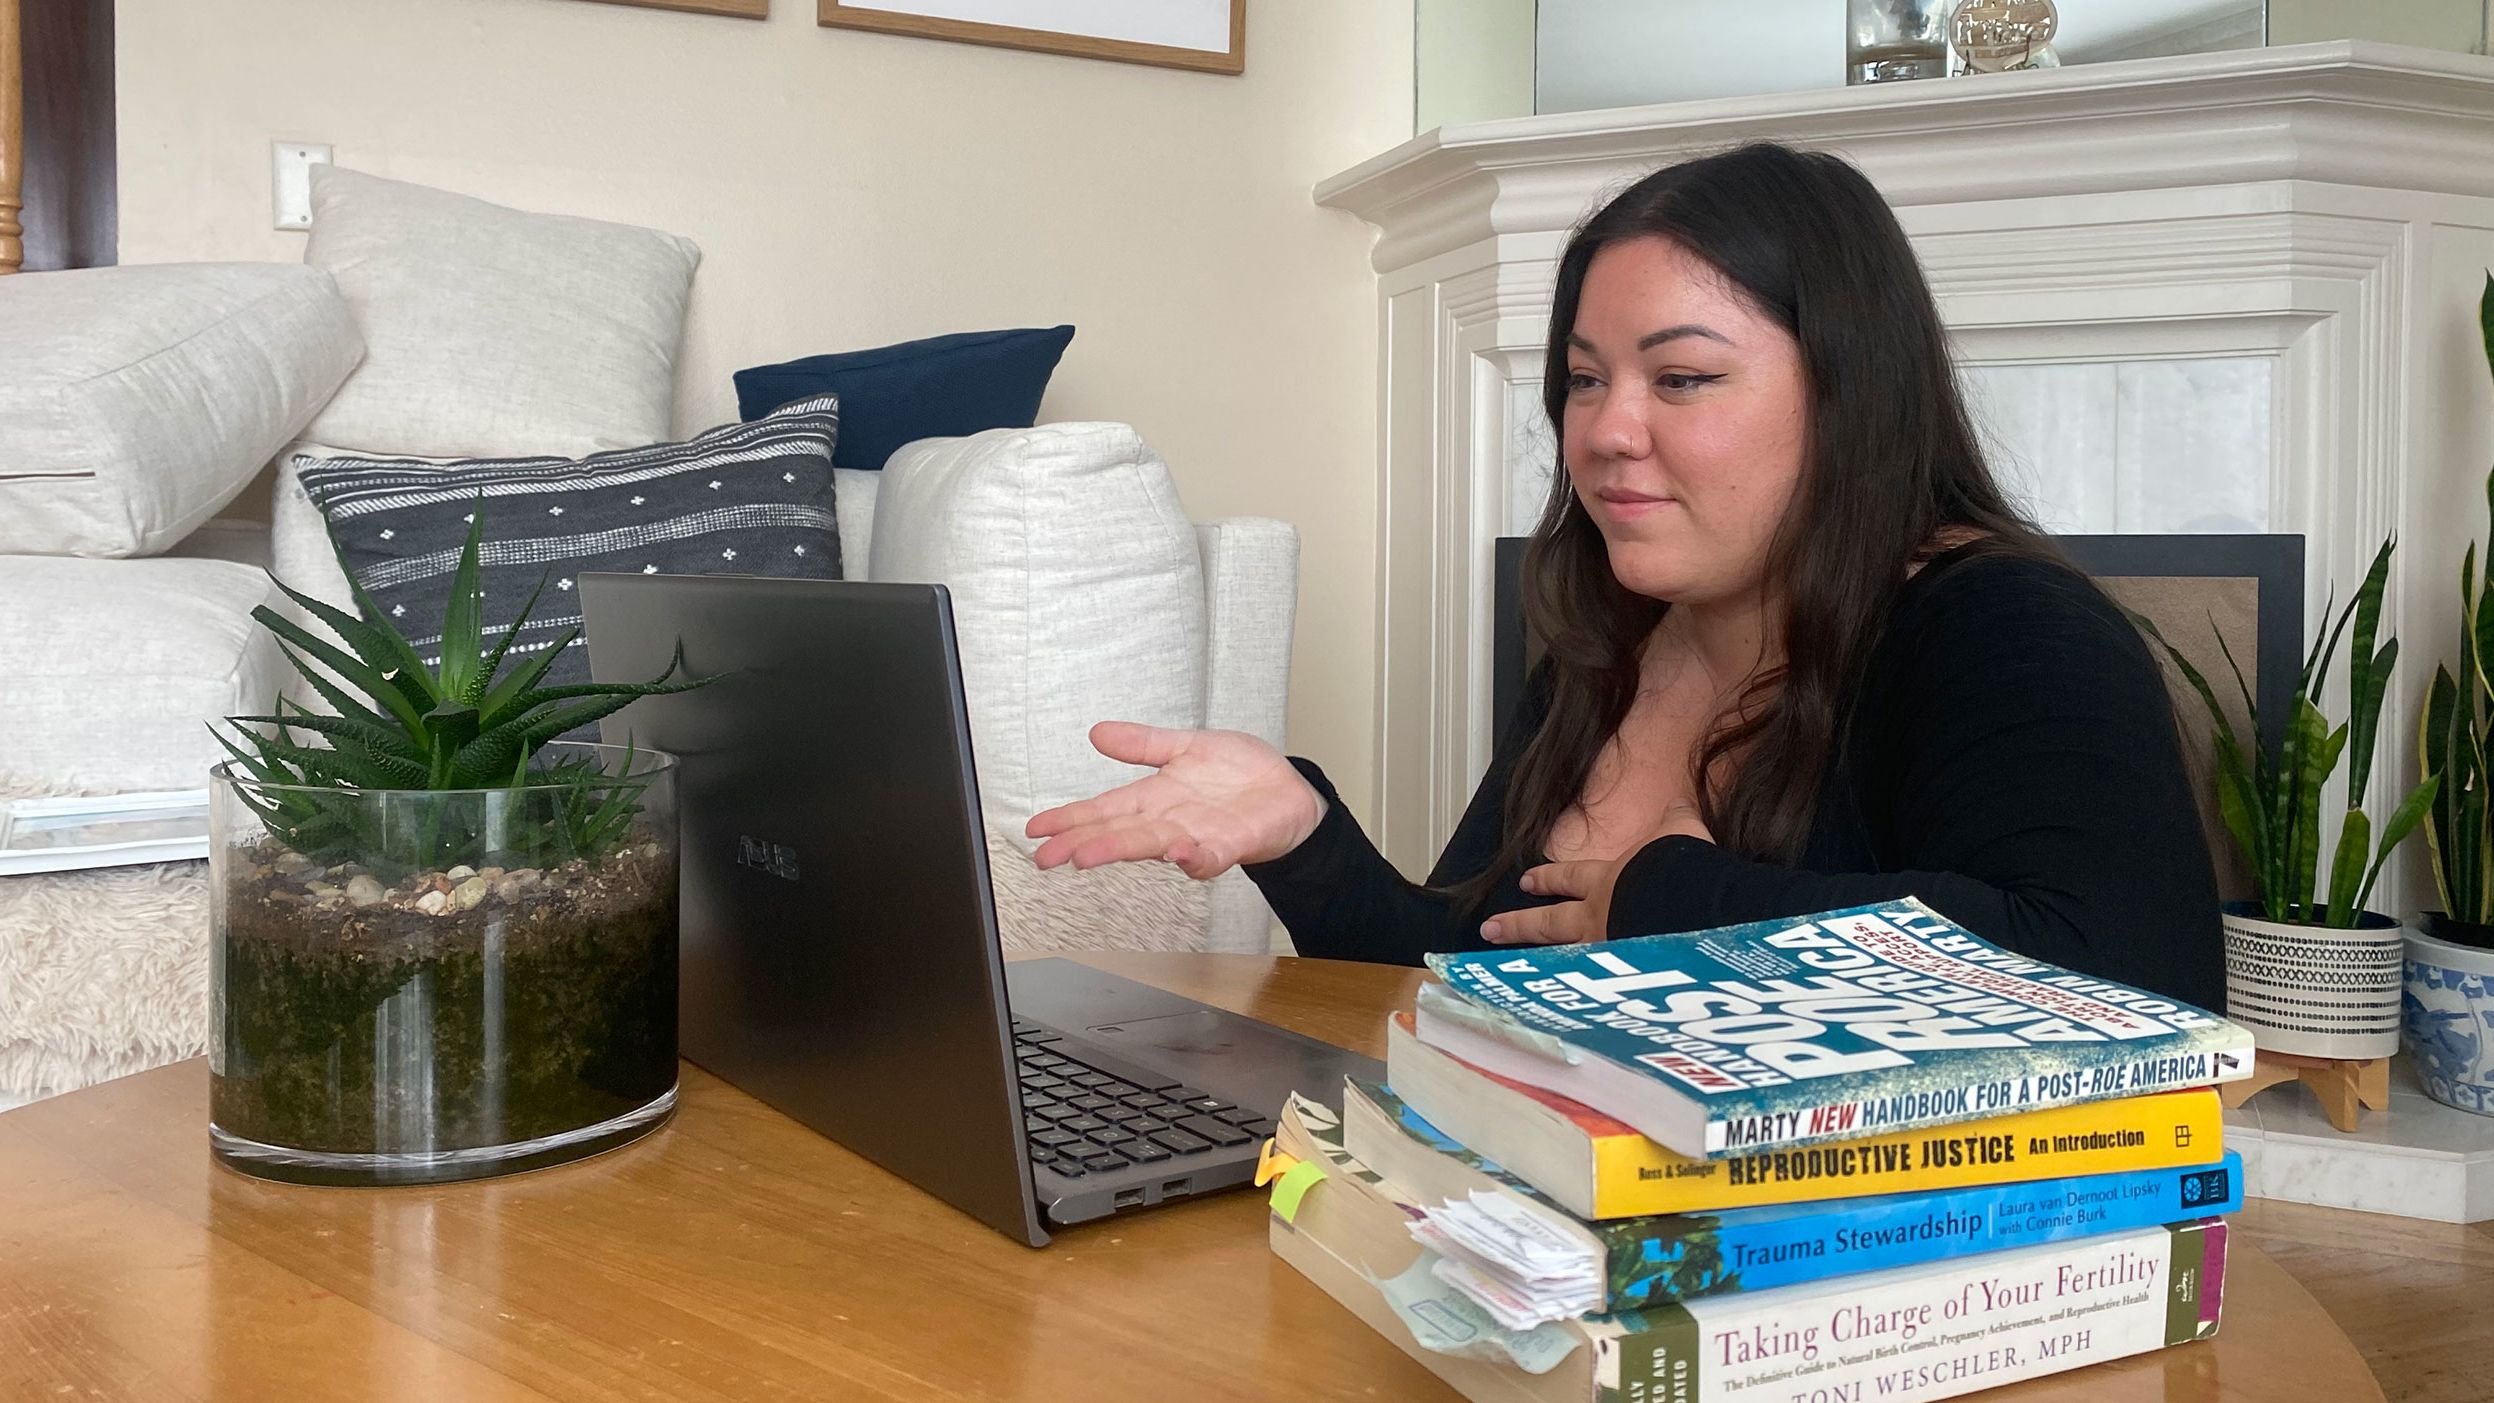 Most clinics don't allow companions or doulas during the pandemic, so Siobhan Diores meets with a client on Zoom before their appointment to calm any nerves and set expectations for the procedure. 